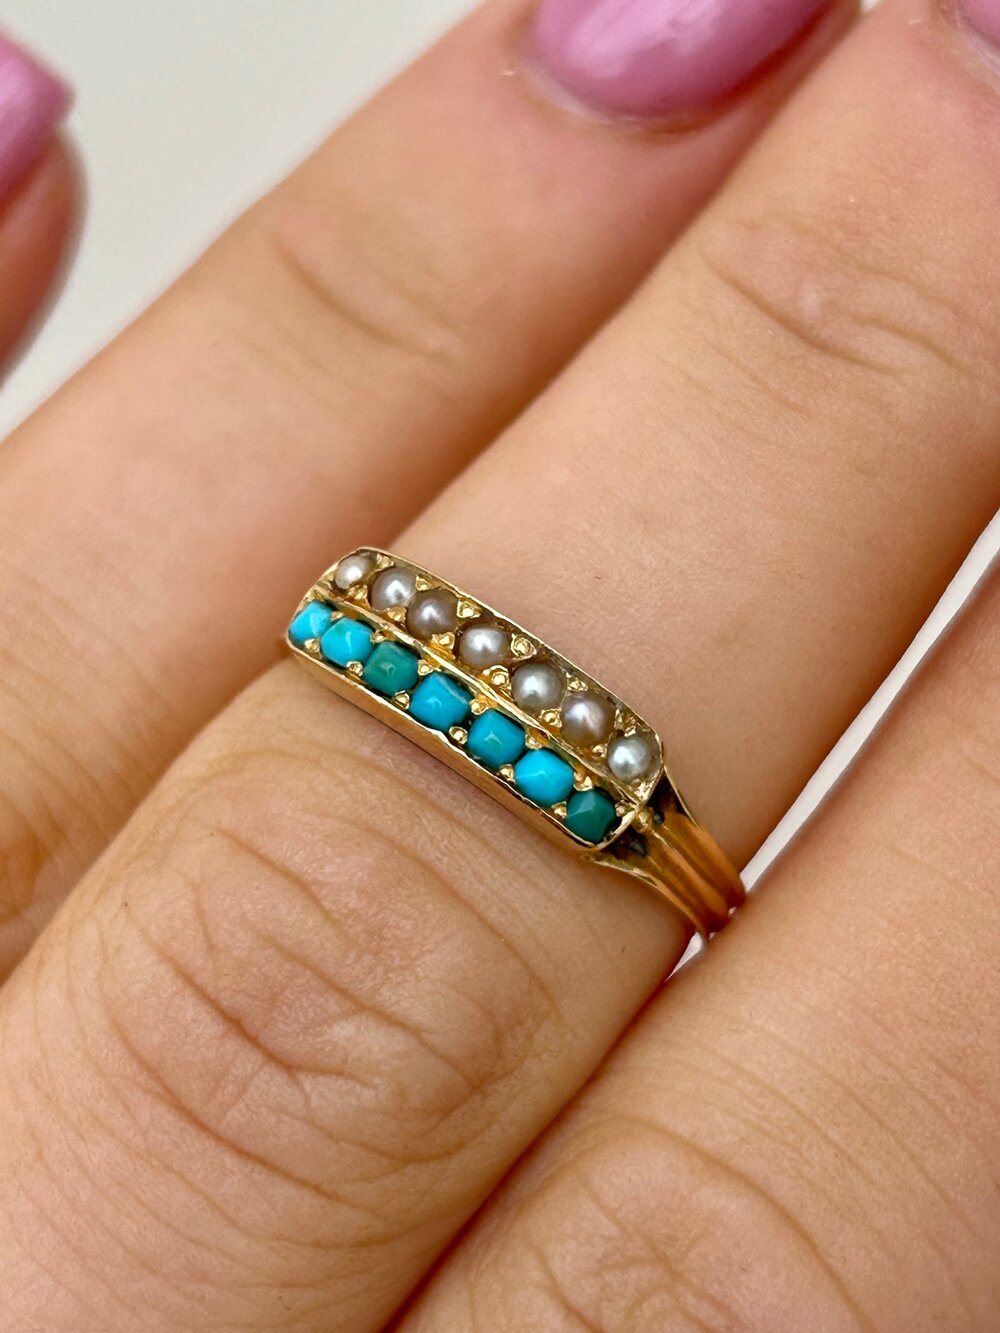 Antique two row pearl and turquoise yellow gold ring — Gembank1973